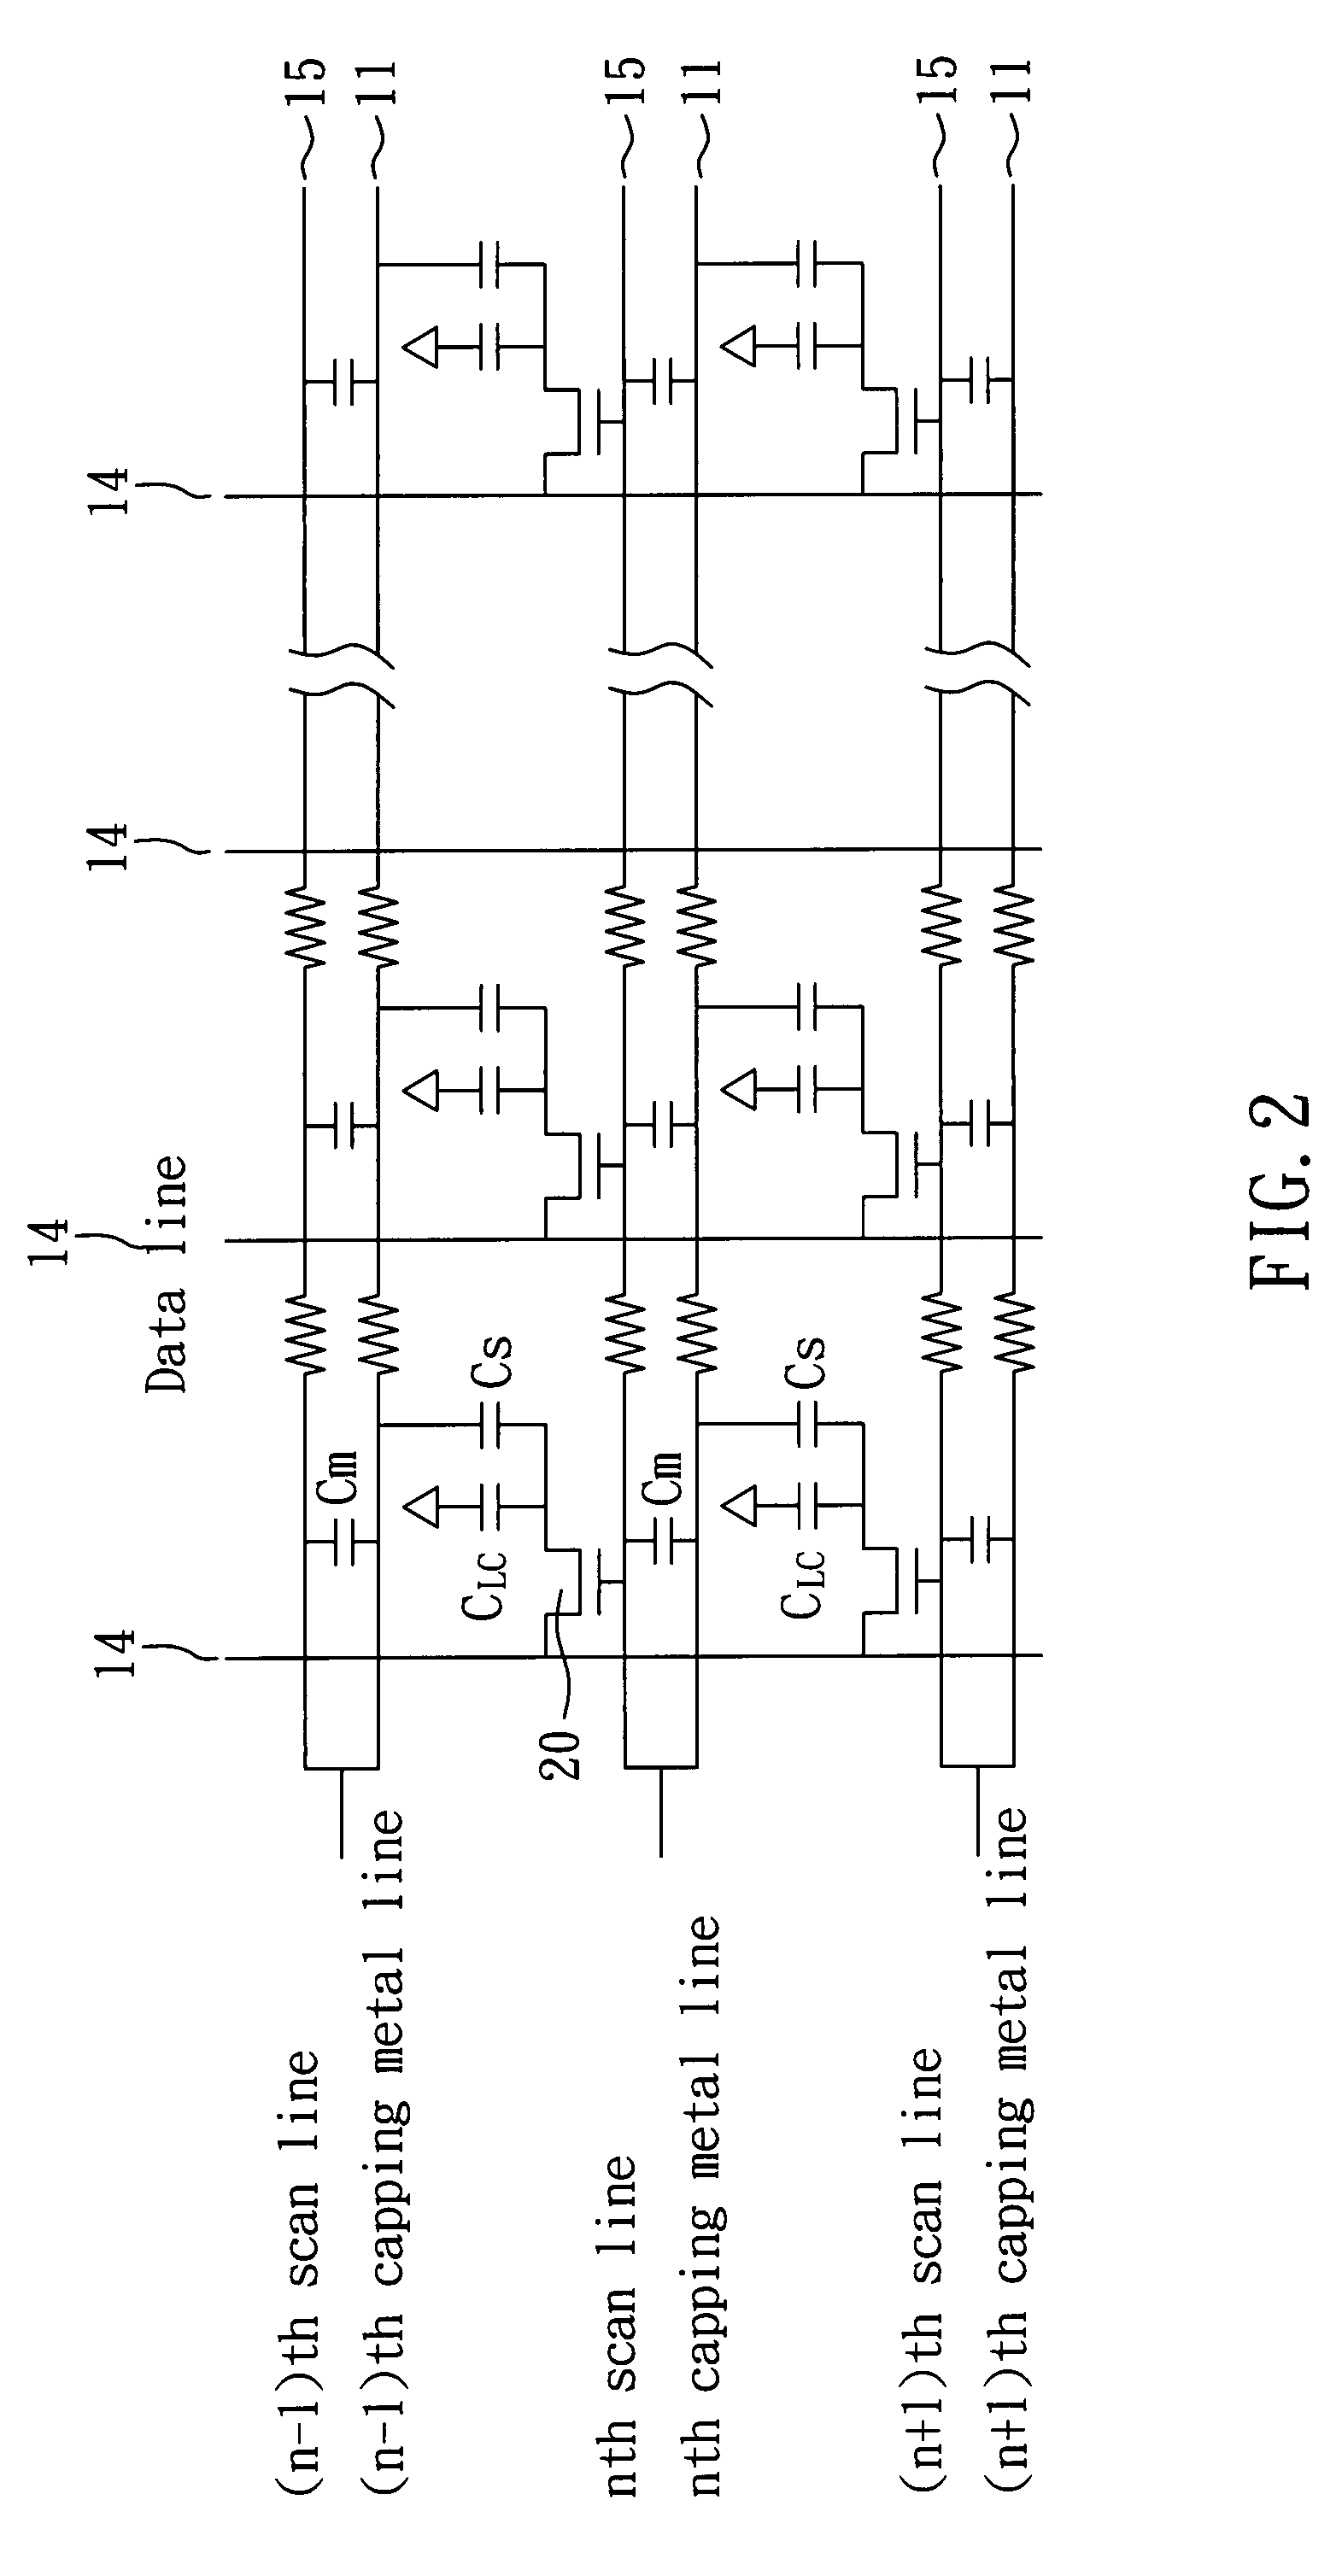 Active array substrate for a liquid crystal display